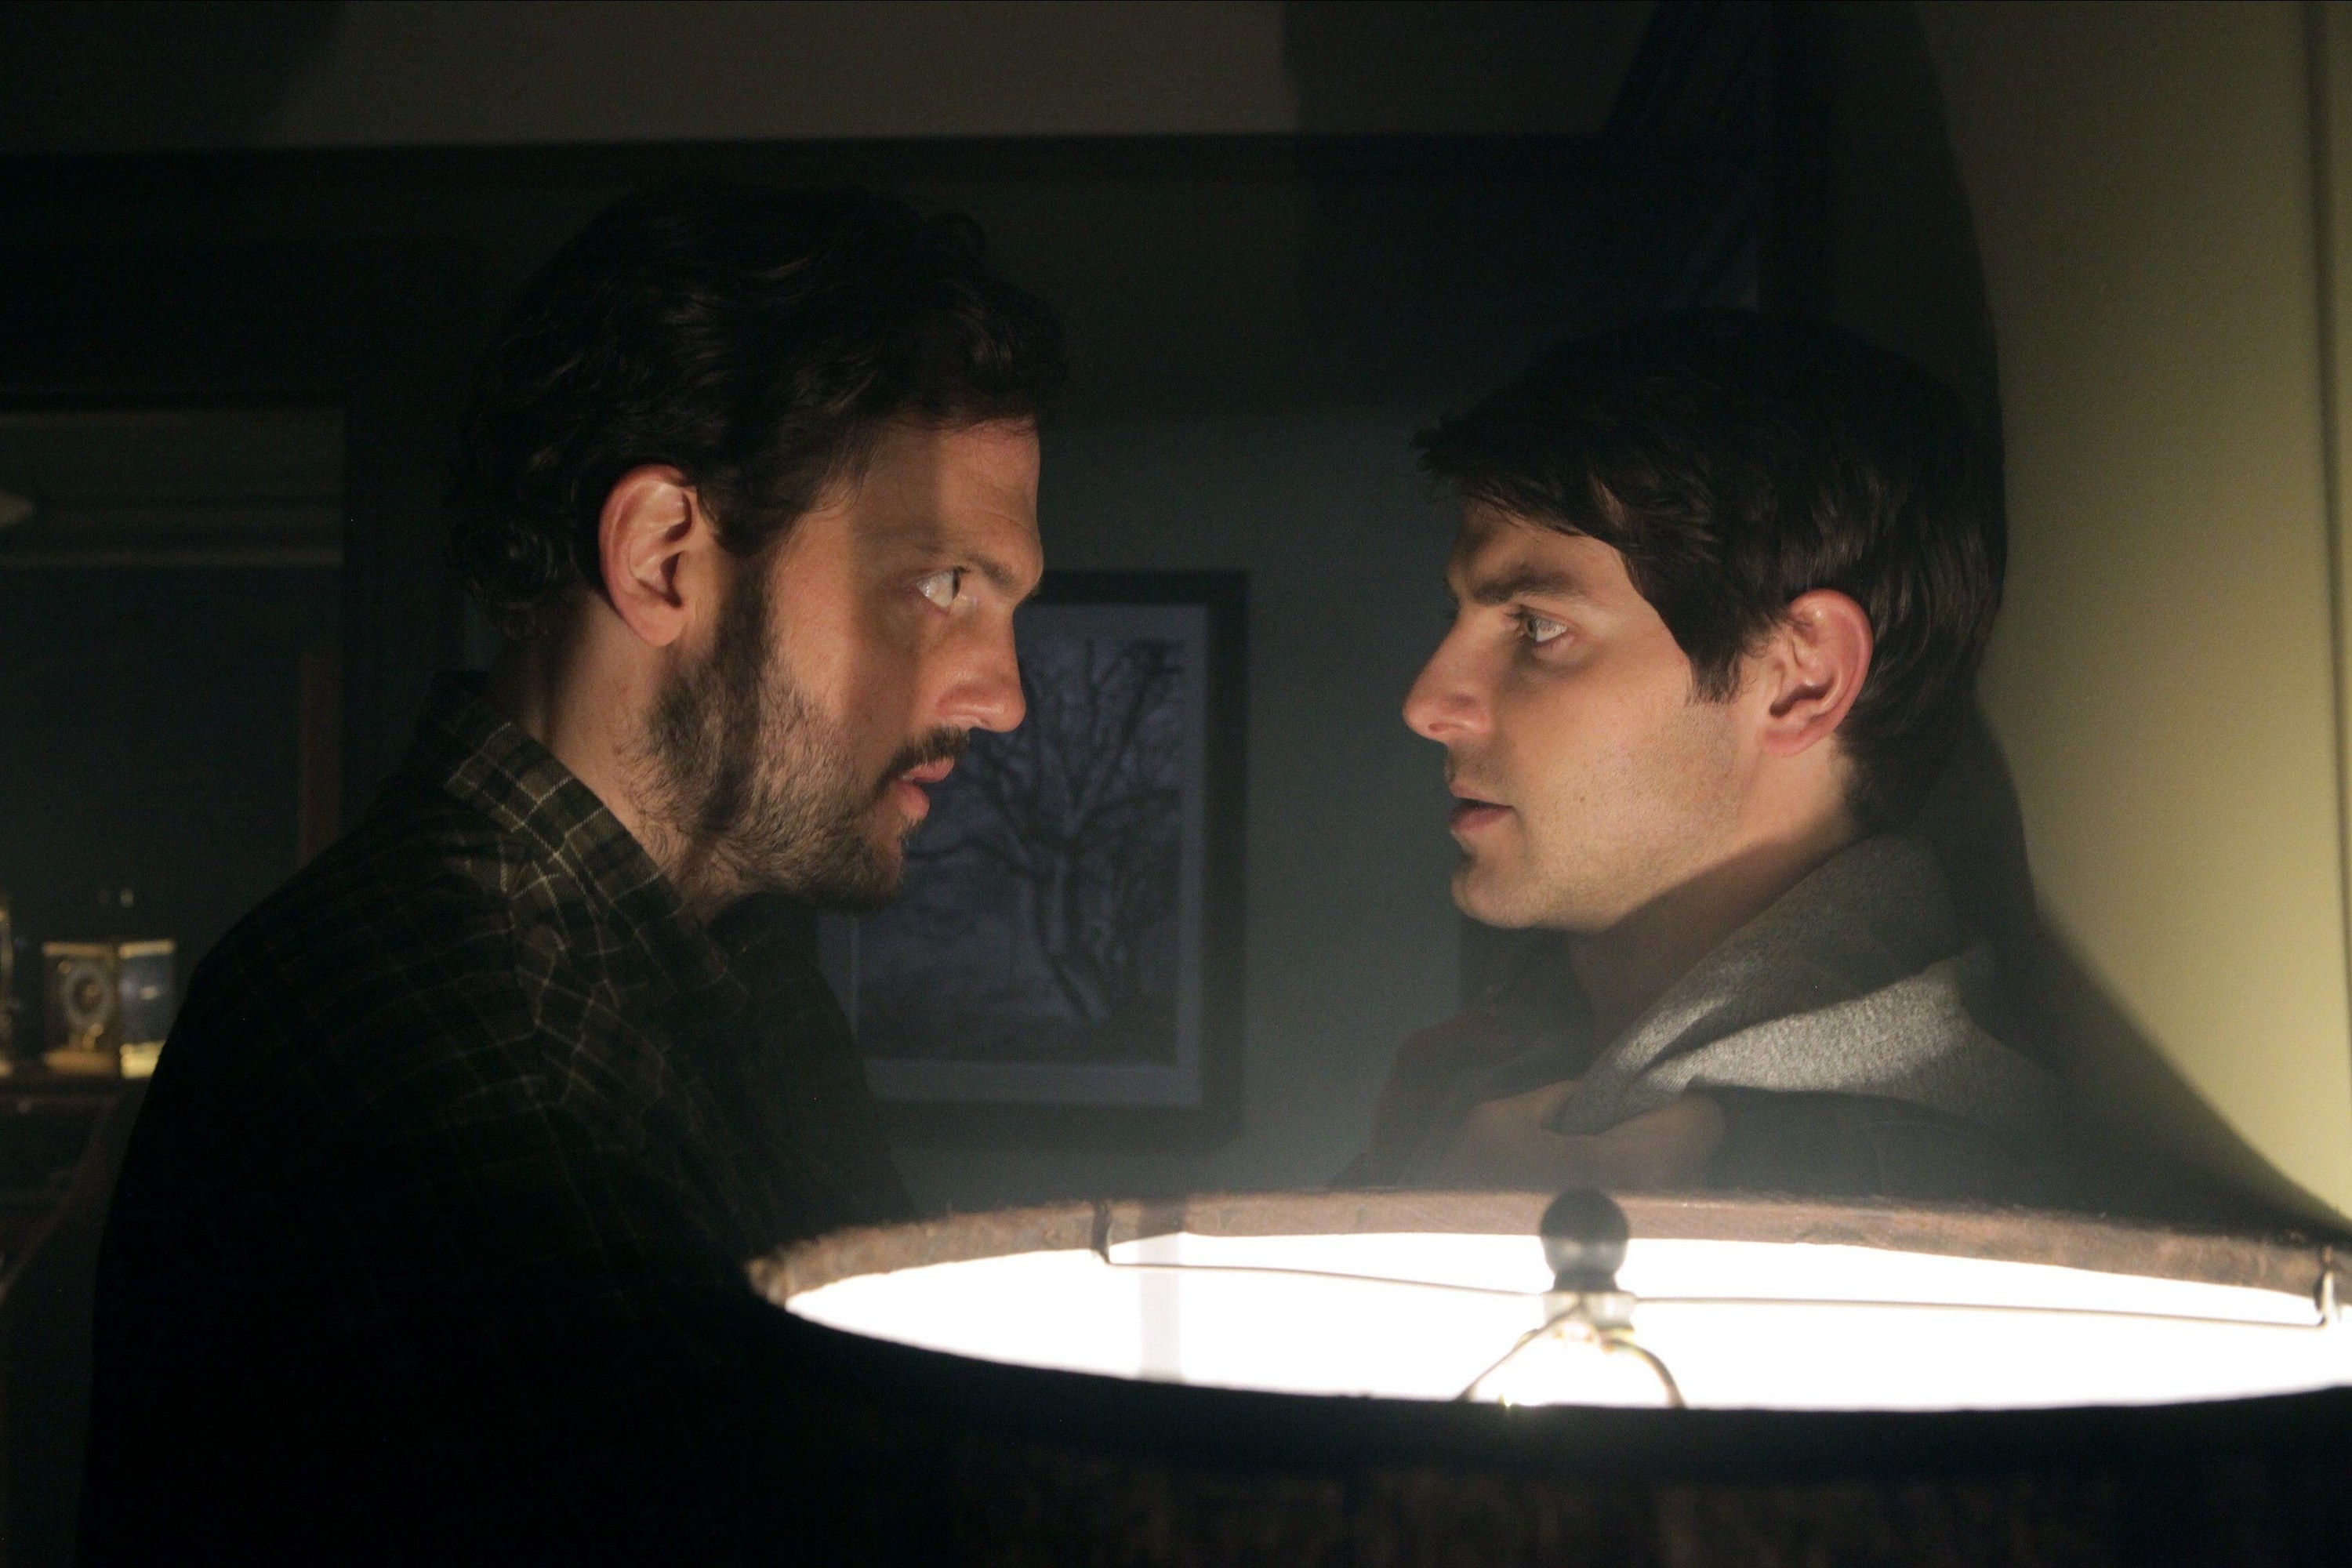 Two men have an intense nighttime staredown by a glowing lamp